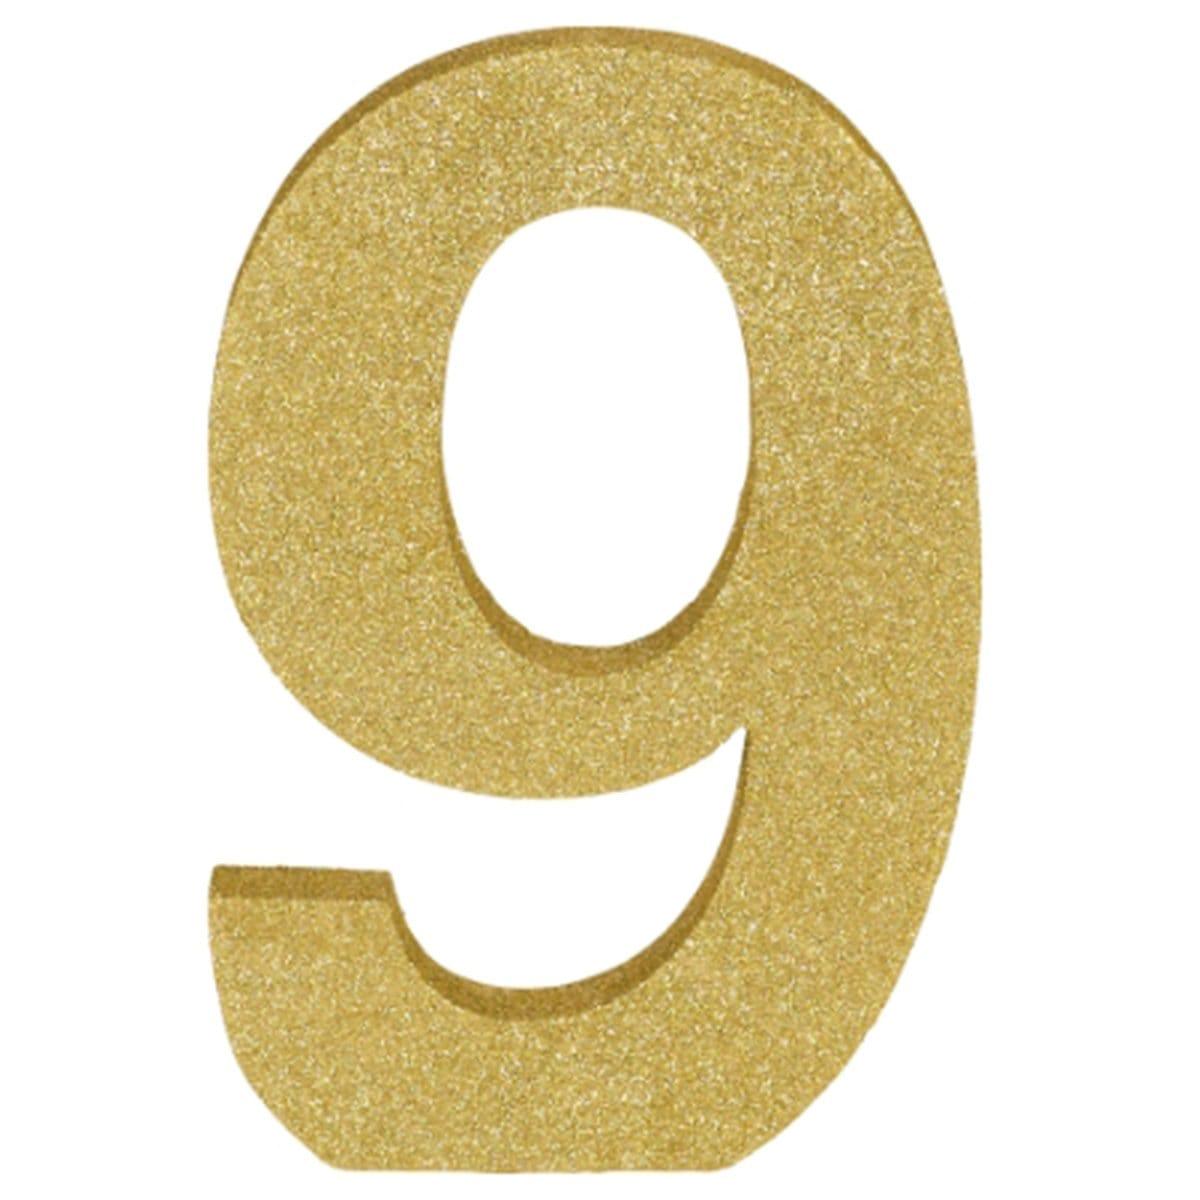 Buy Decorations Gold Glitter Number - 9 sold at Party Expert